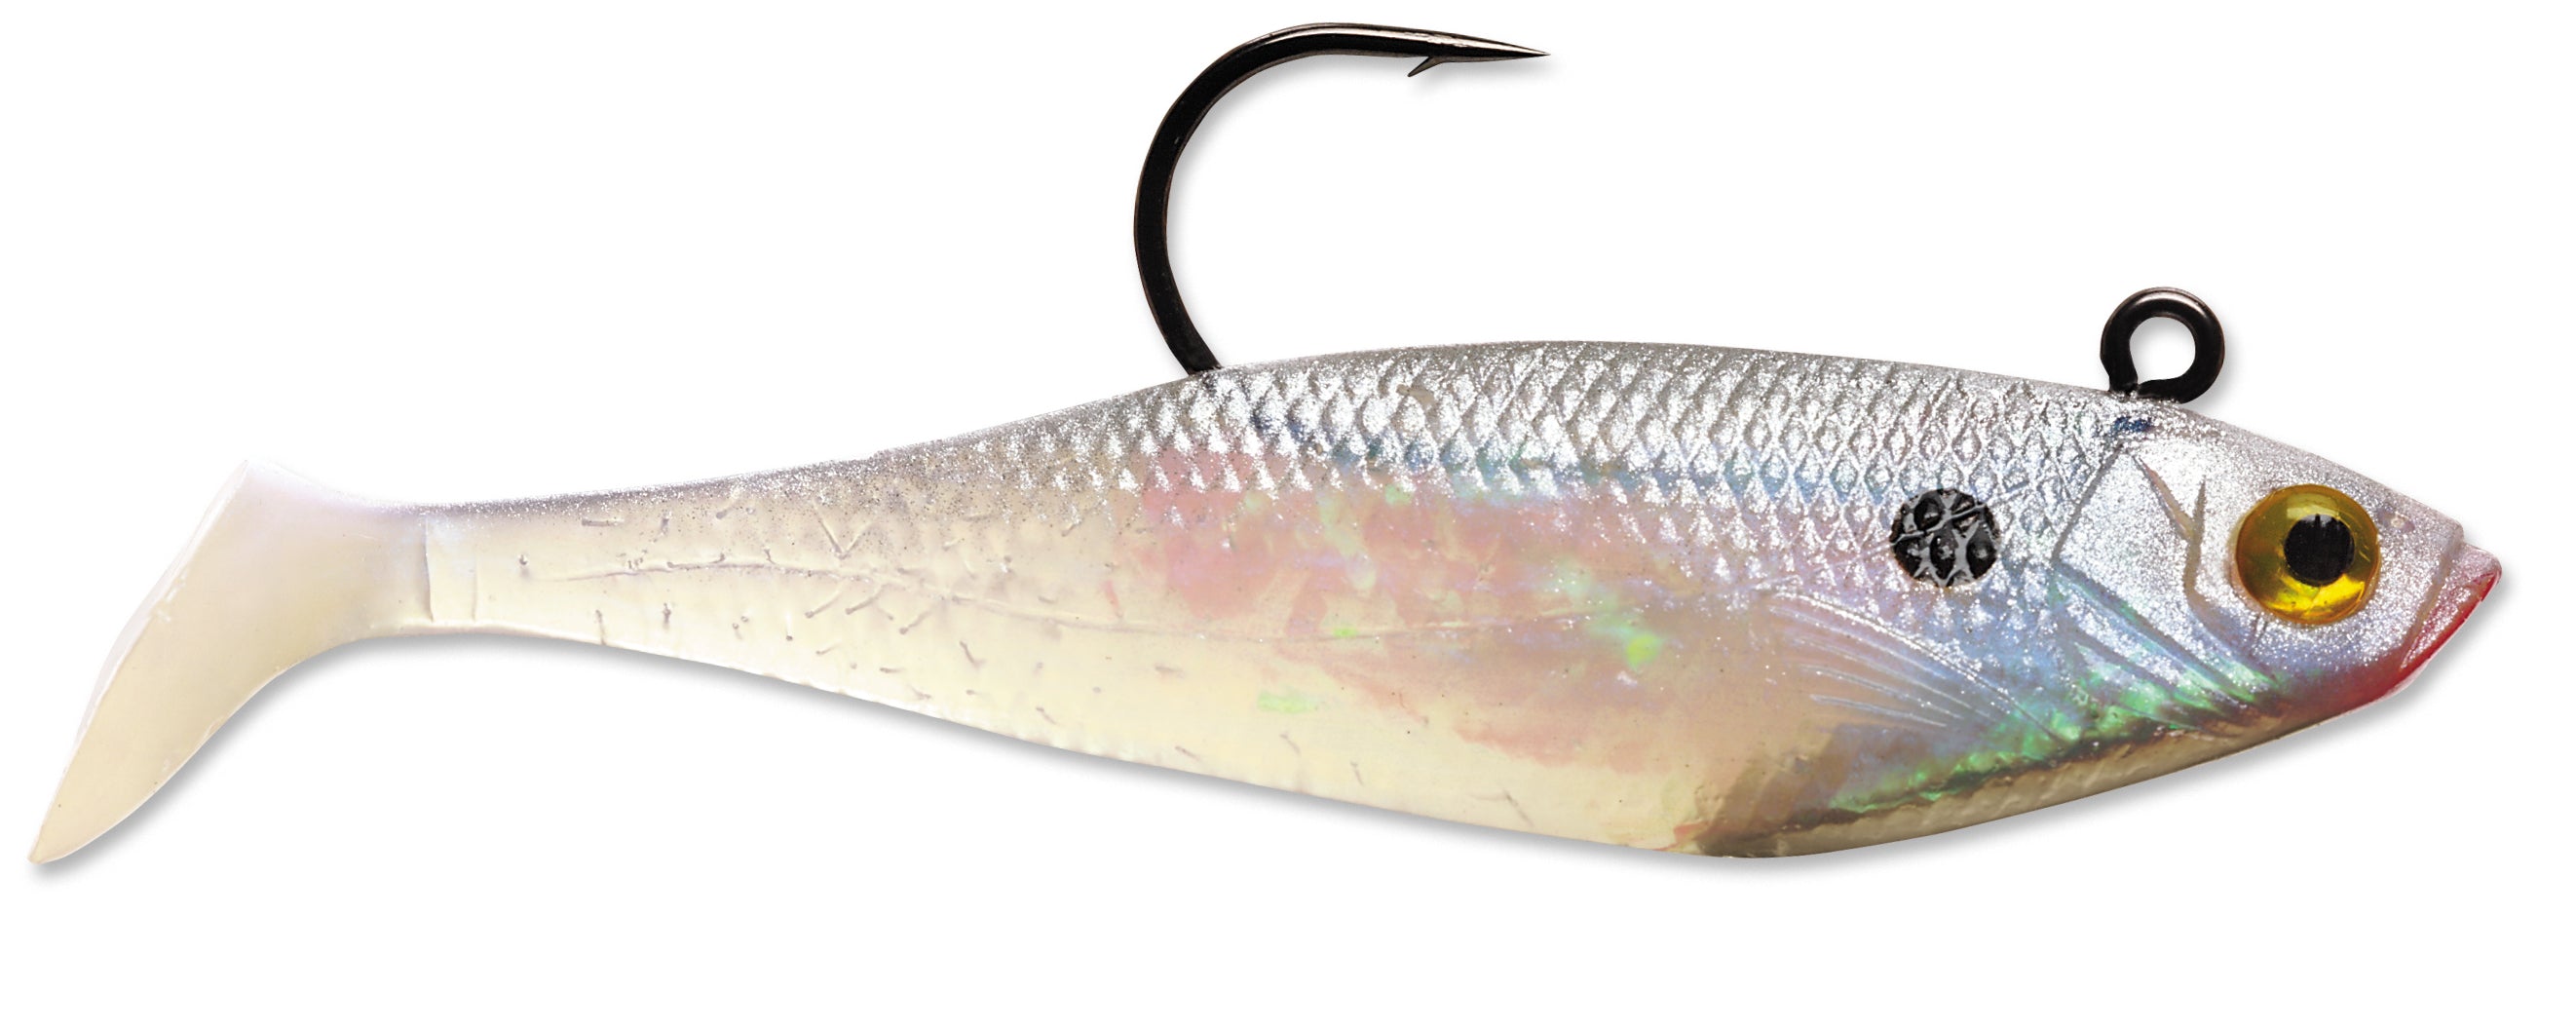 3 Storm WildEye 4.5 Pro Curl Tail Bait-N-Switch Fishing Lure Cracked Ice